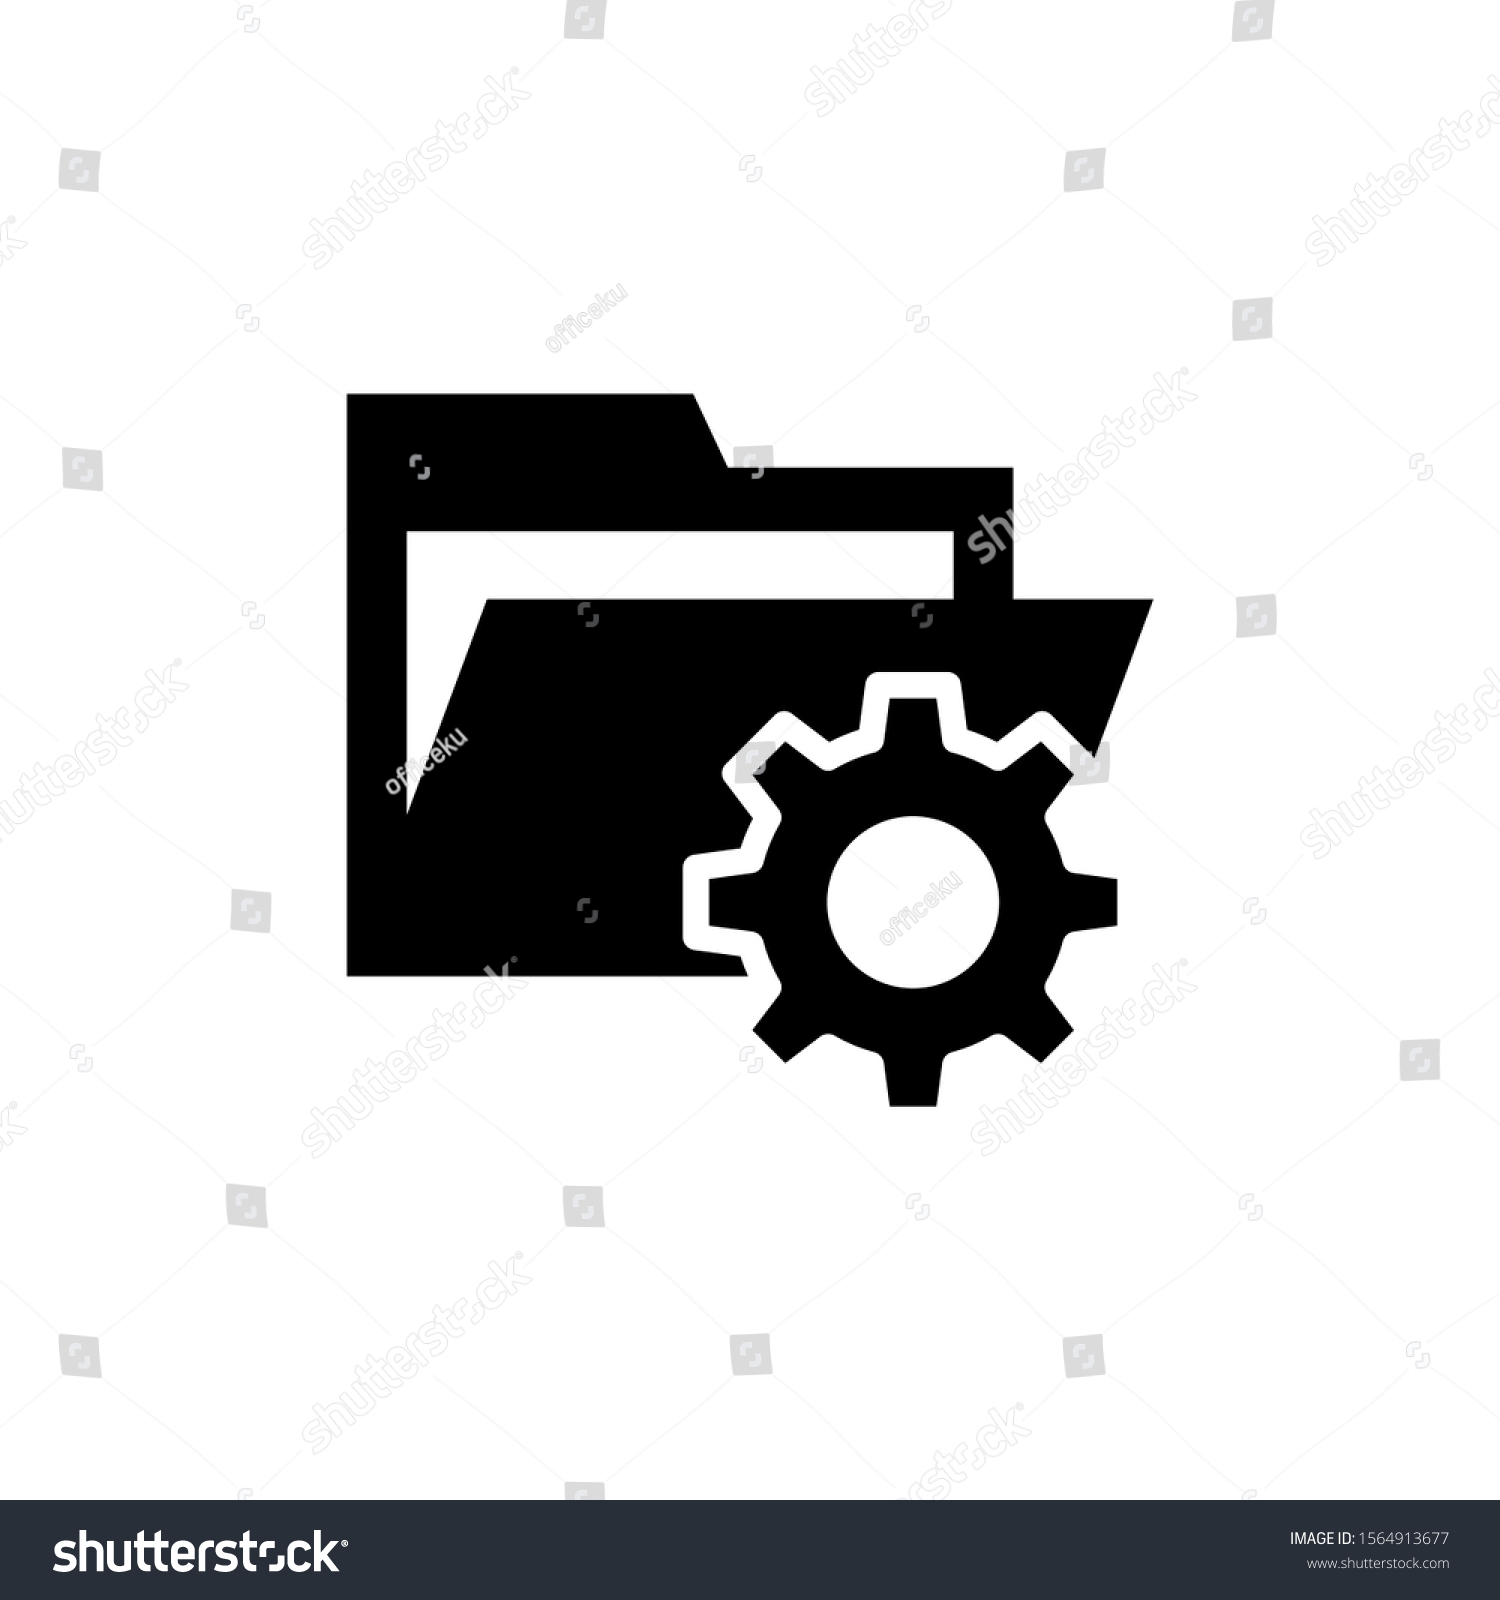 folder with cogwheel icon in black flat design on white background, Project Management icon, data management, folder, project goals, task management icon with settings sign, Project Management icon #1564913677